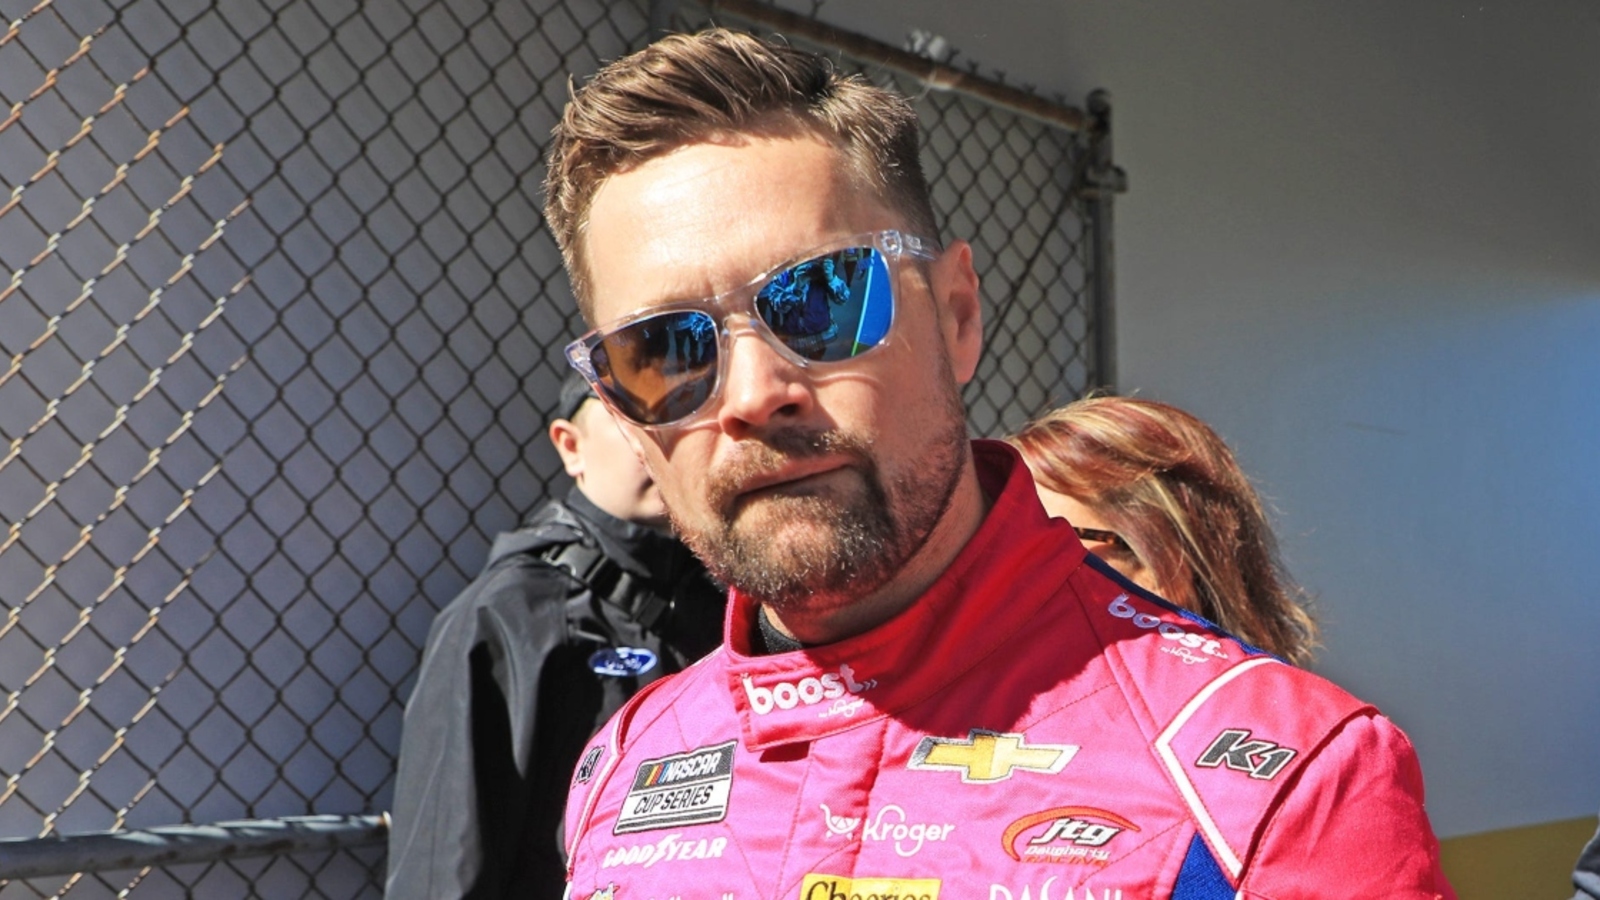 Ricky Stenhouse Jr. reveals he wasn’t planning on punching Kyle Busch